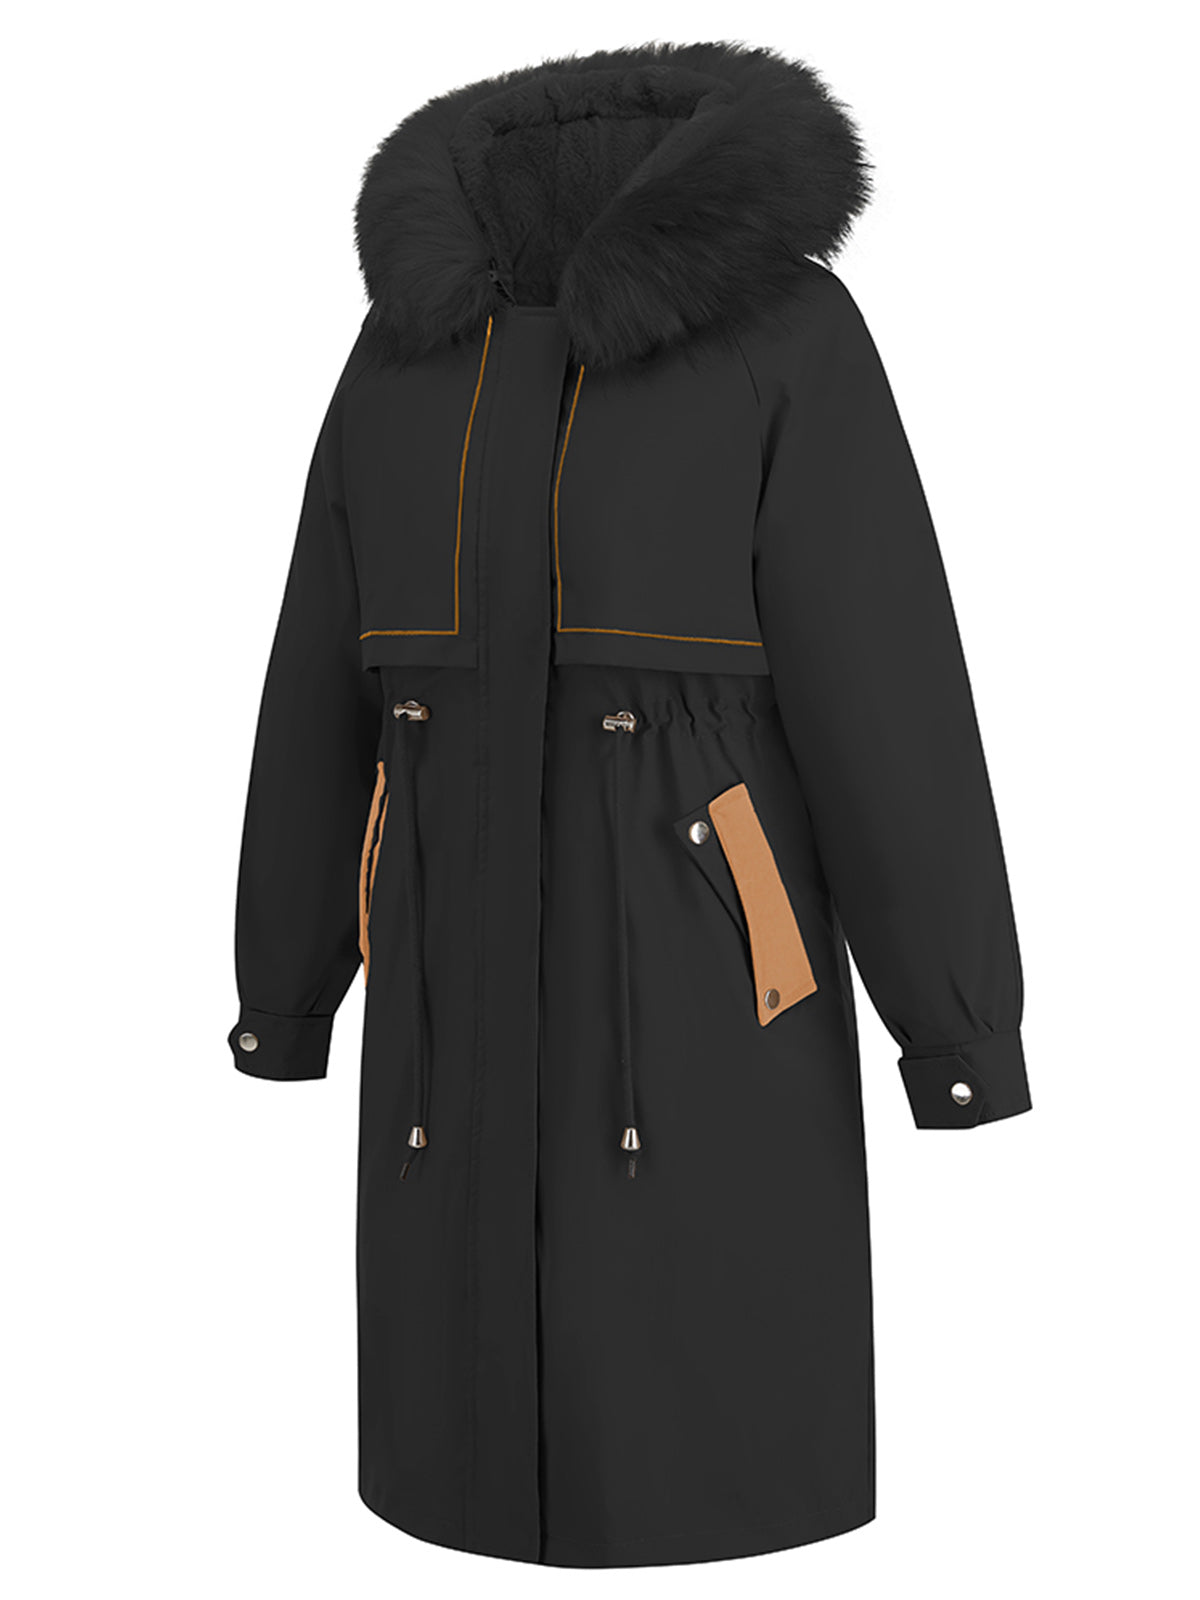 Warm Puffer Jacket Coat Thicken Parka with Hood